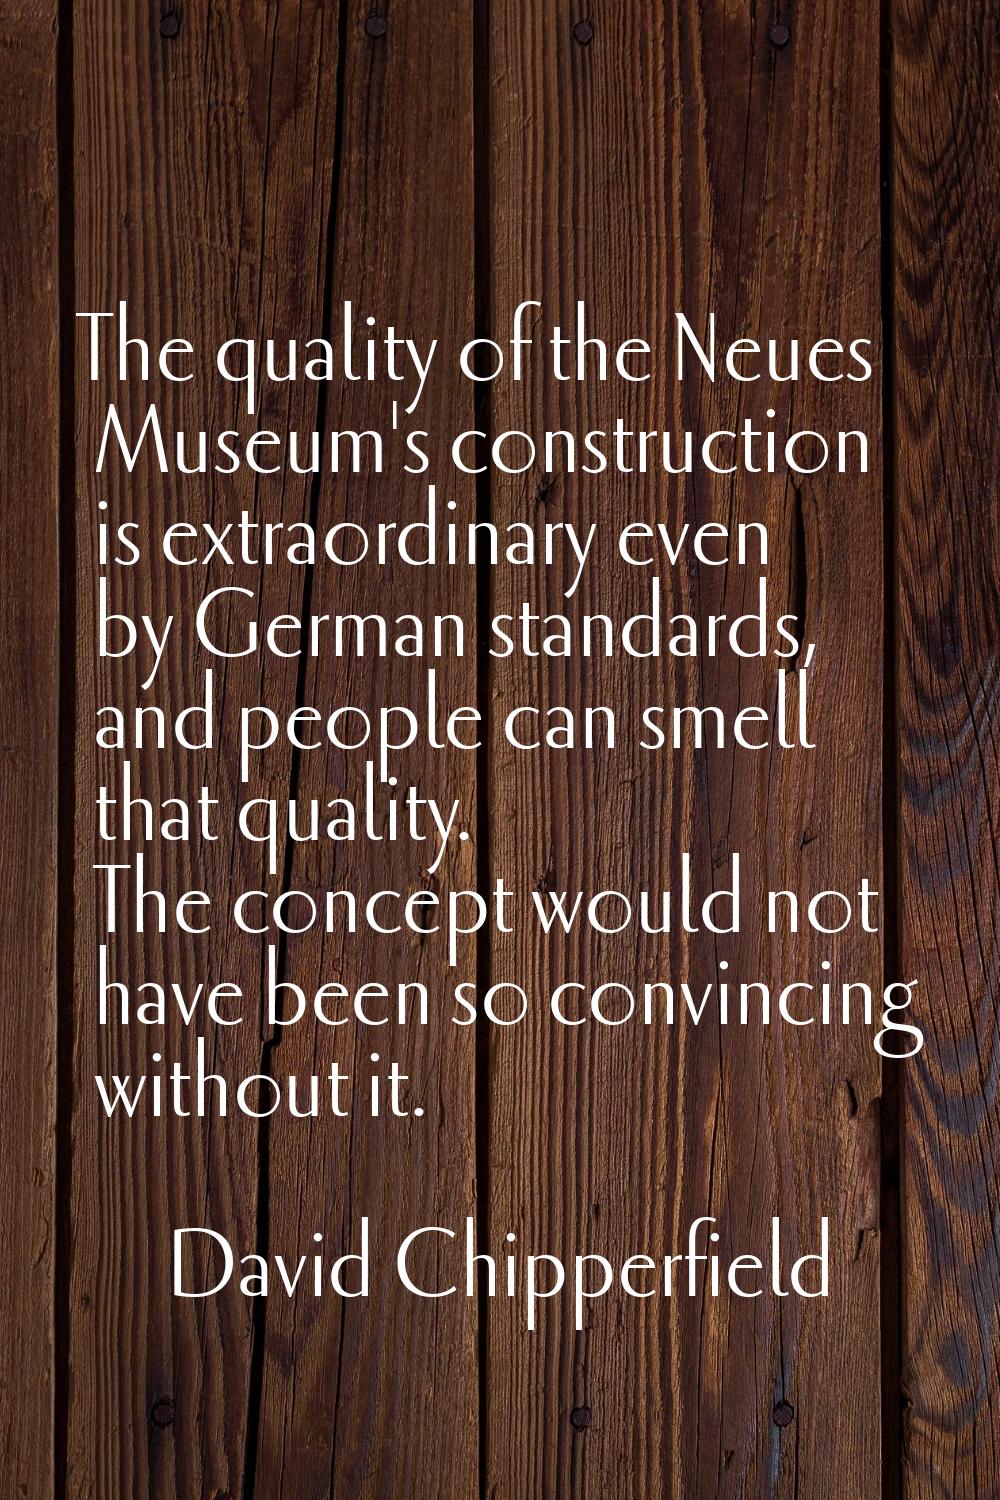 The quality of the Neues Museum's construction is extraordinary even by German standards, and peopl